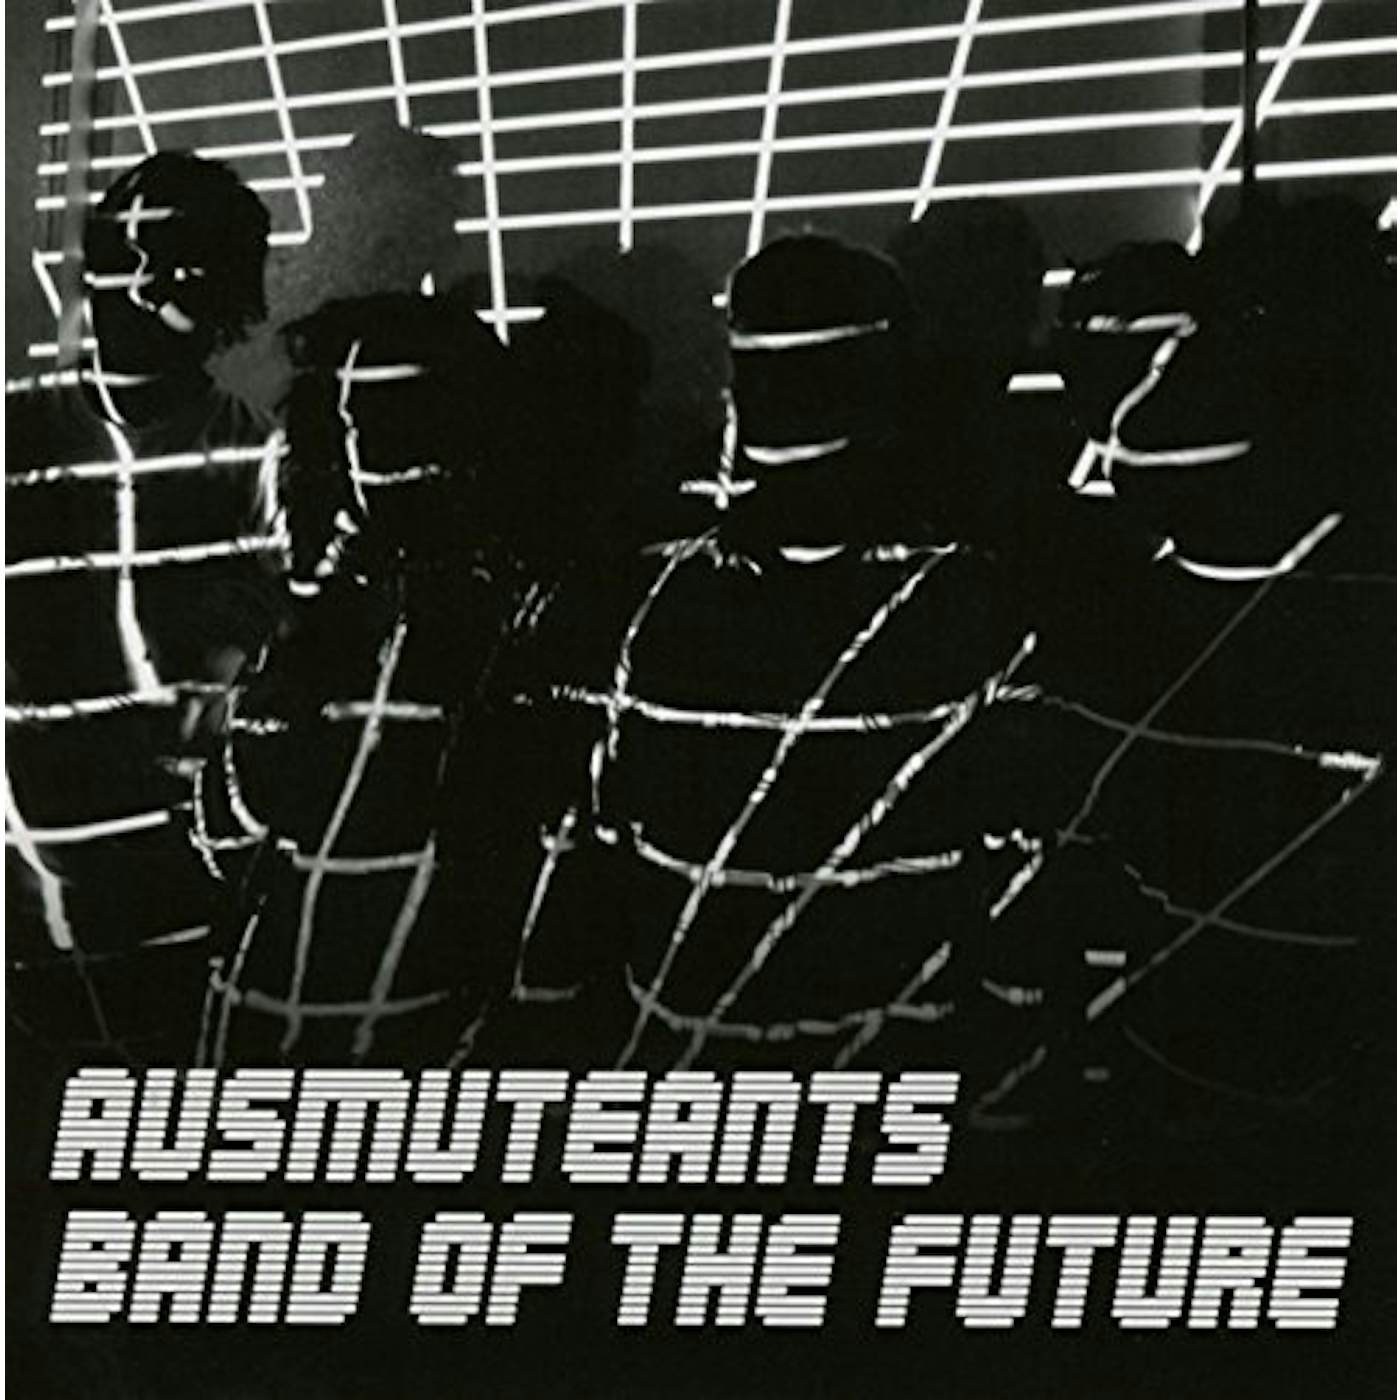 Ausmuteants BAND OF THE FUTURE CD